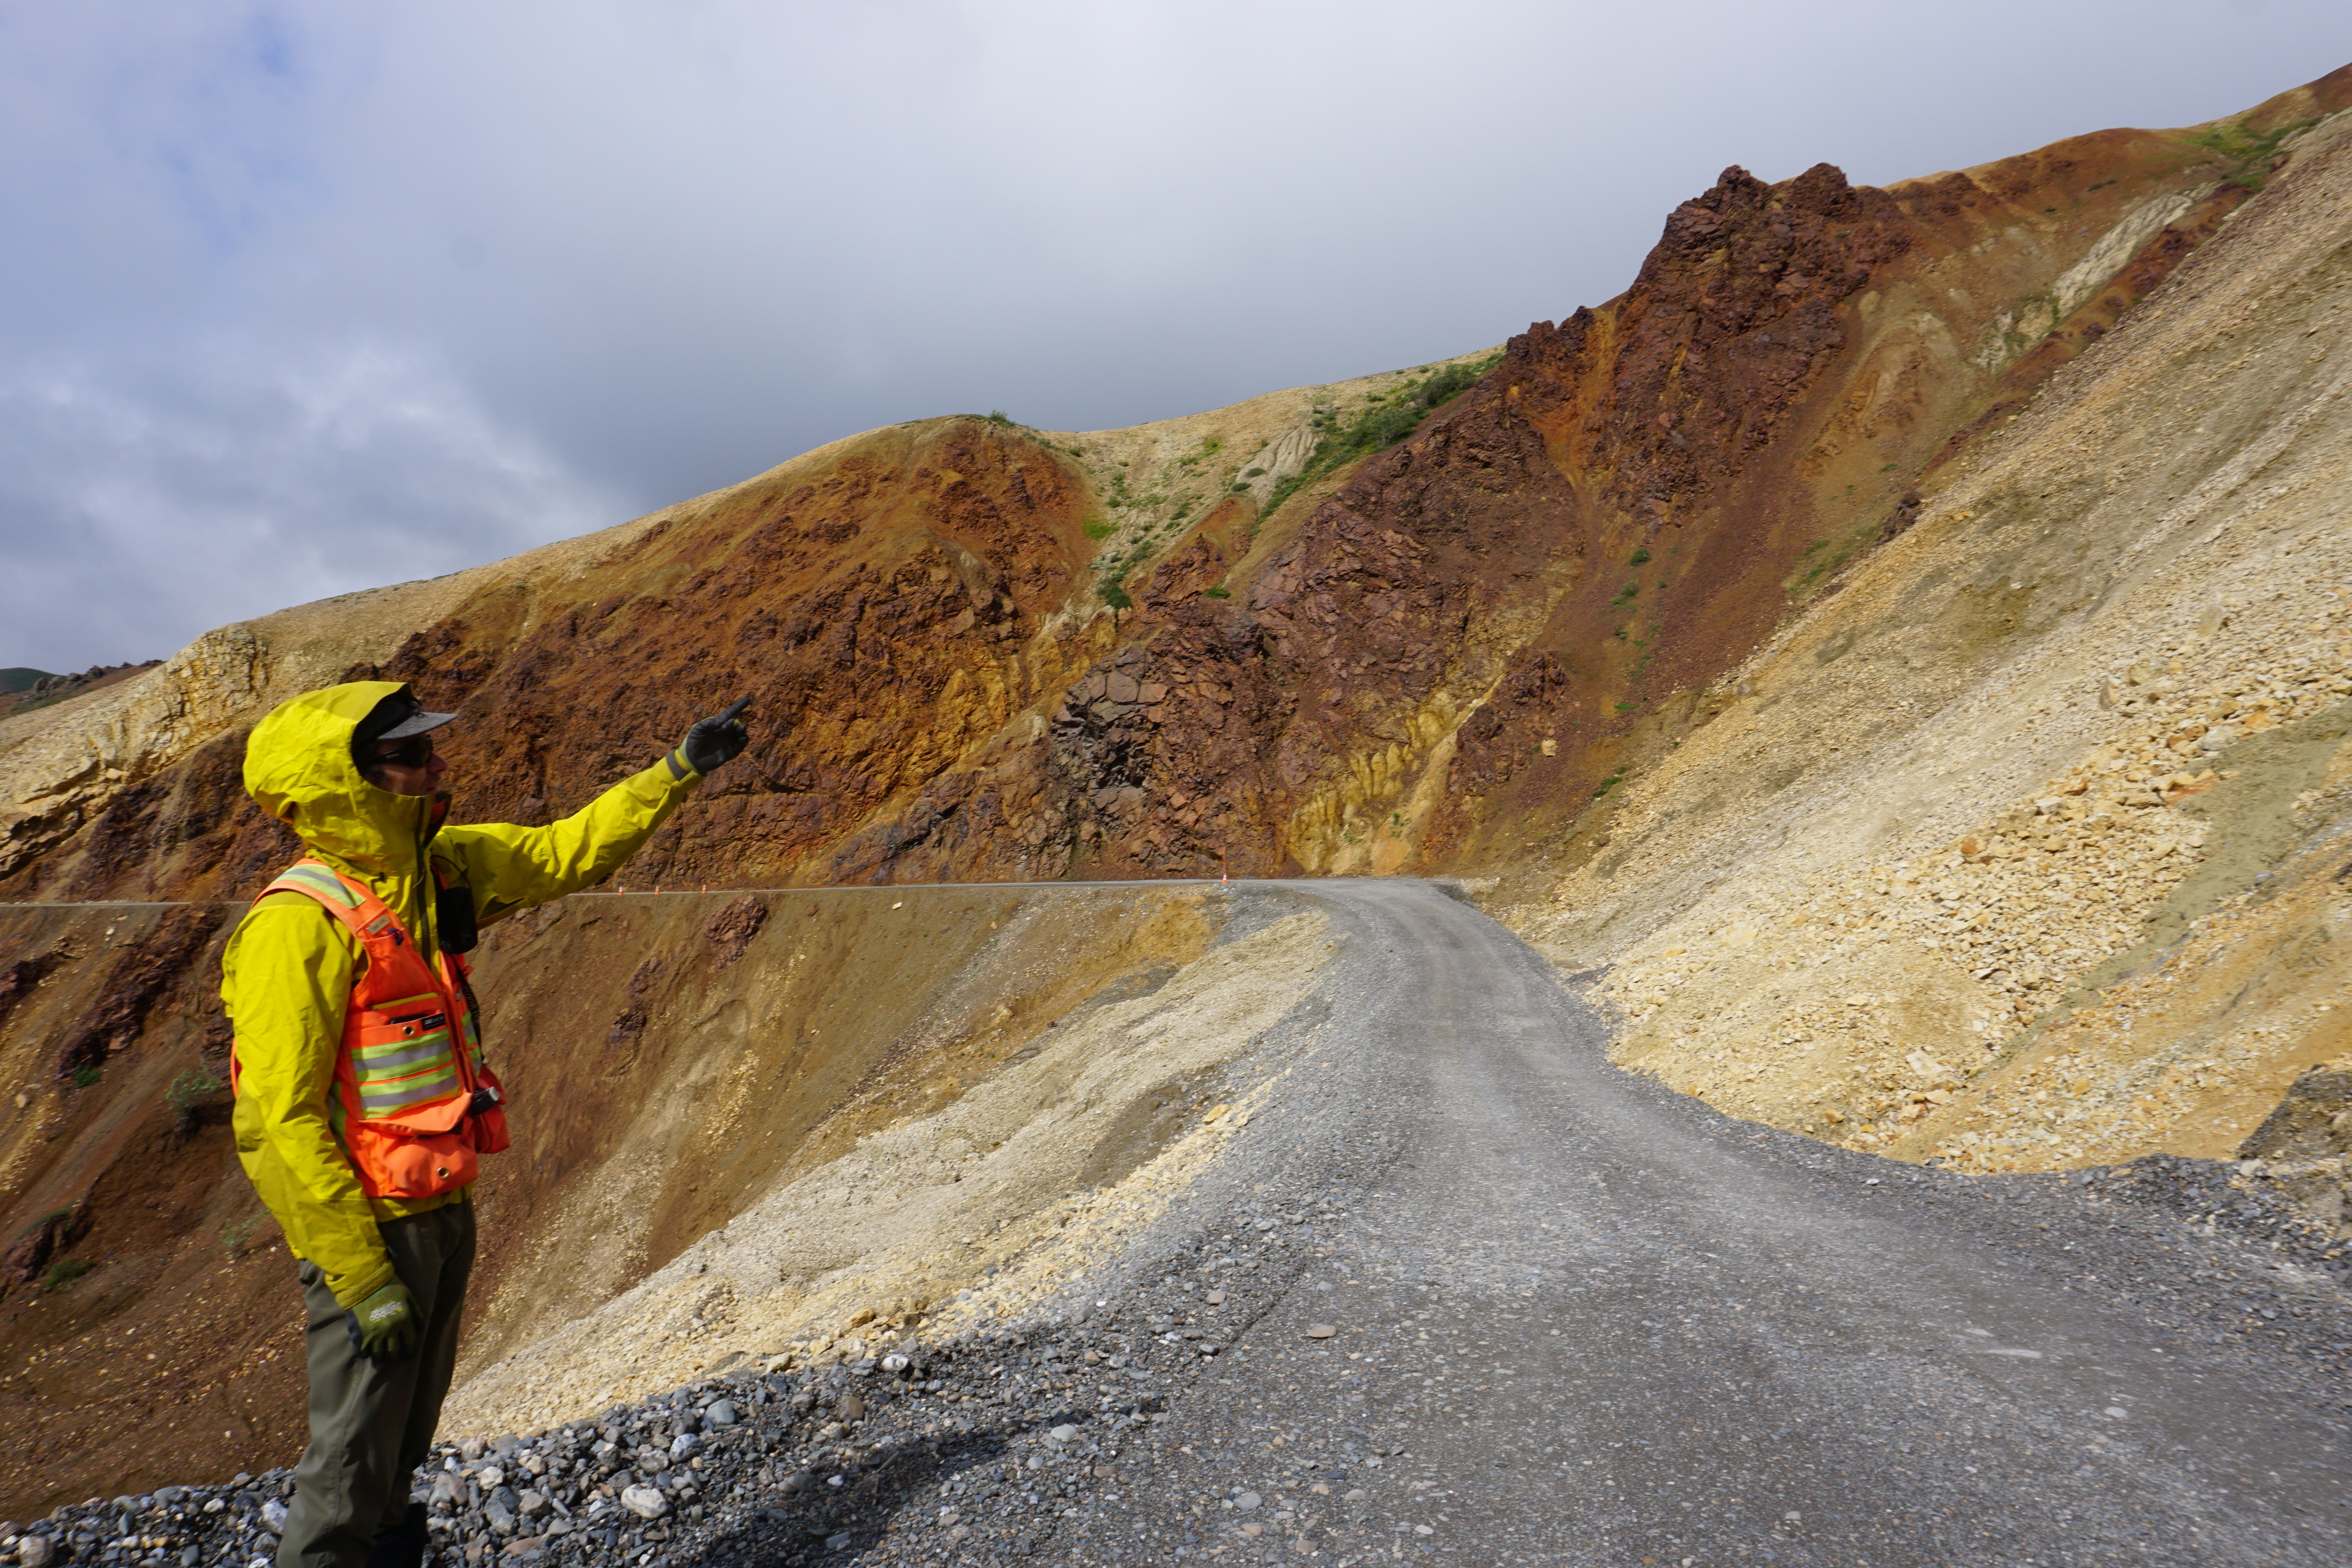 Geologist Denny Capps points out the unsteady terrain that has been thawing and sliding more frequently at the Pretty Rocks site in Denali National Park